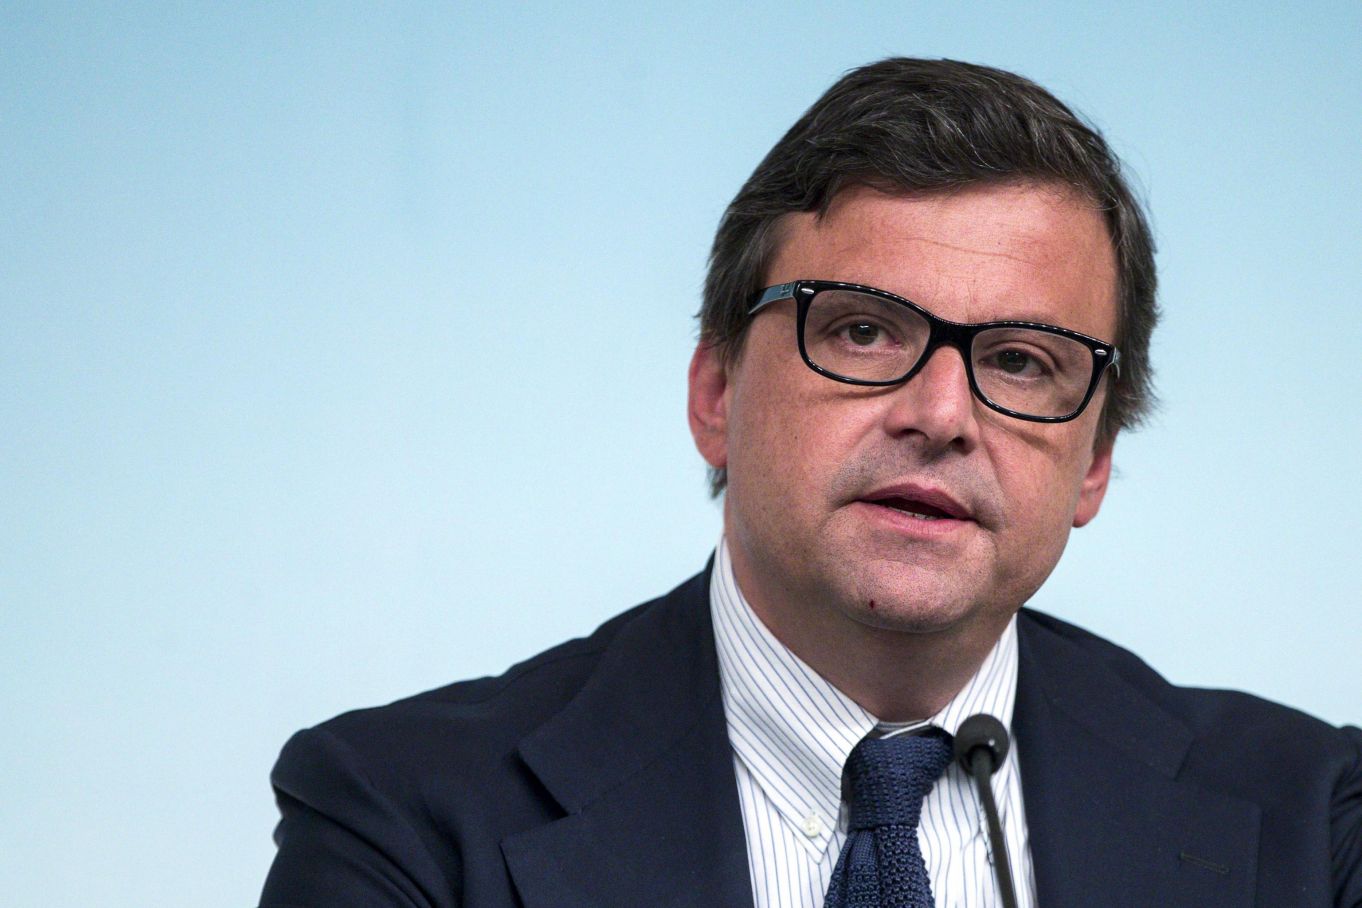 who-is-carlo-calenda-wanted-in-rome